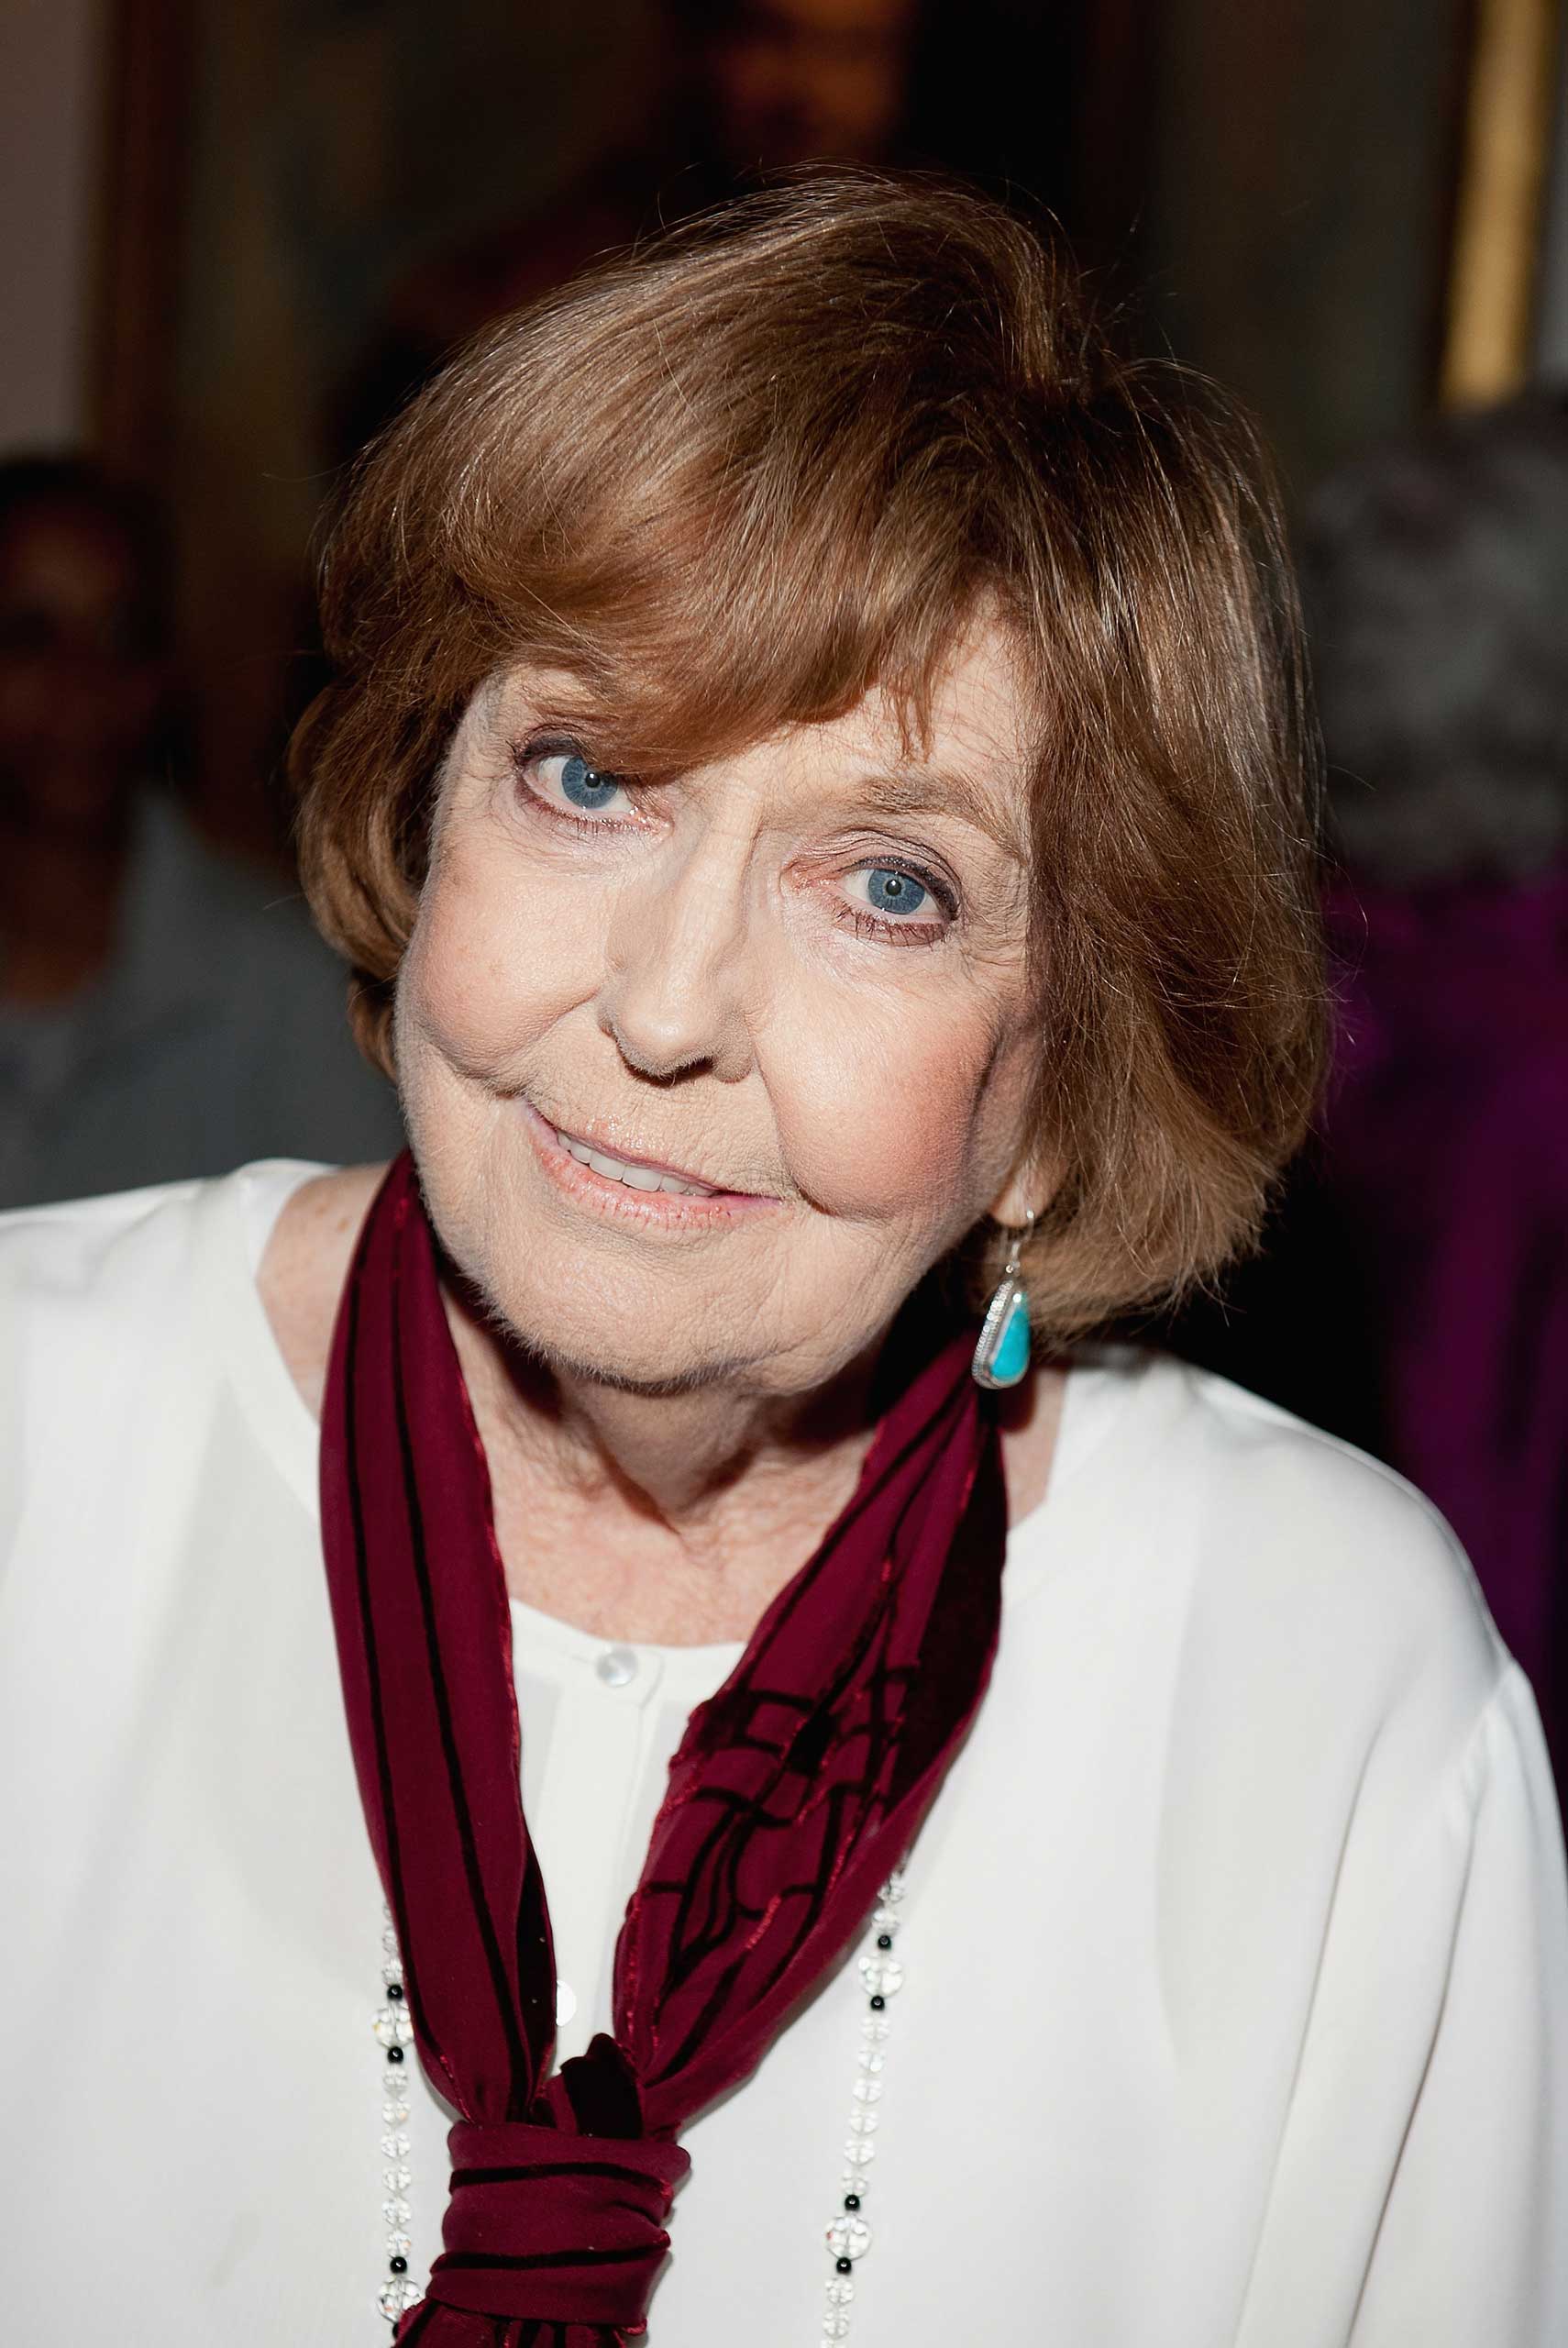 Anne Meara attends the 2011 Players Foundation for Theatre Education Hall of Fame Inductions at The Players Club on May 1, 2011 in New York City. (Photo by Dave Kotinsky/Getty Images) *** Local Caption *** Anne Meara;